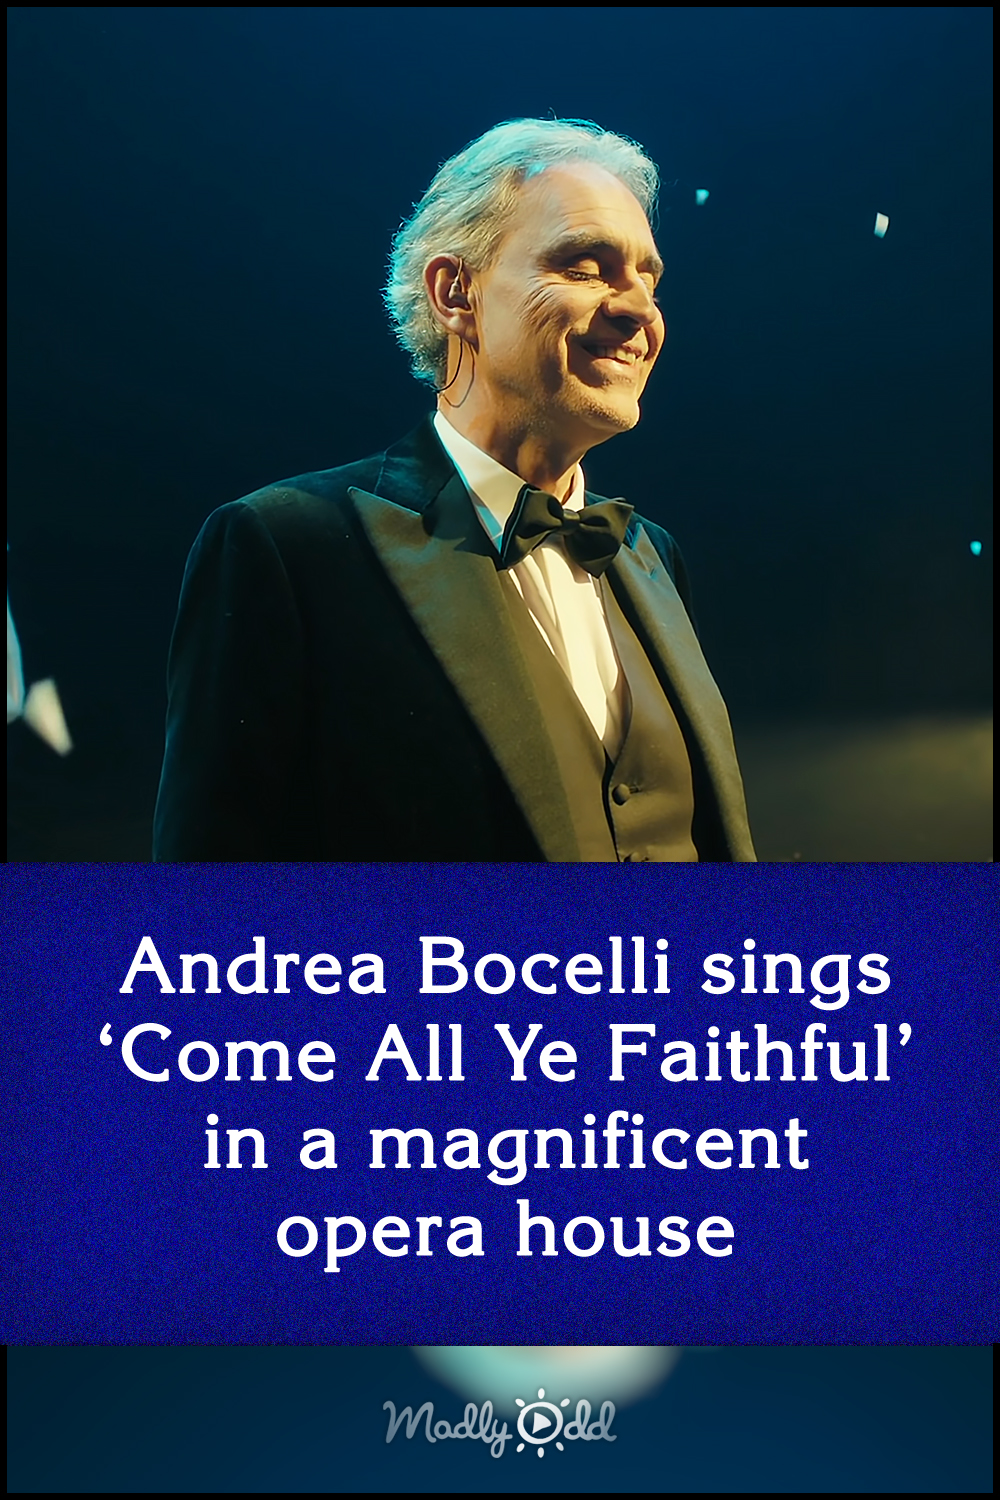 Andrea Bocelli sings ‘Come All Ye Faithful’ in a magnificent opera house